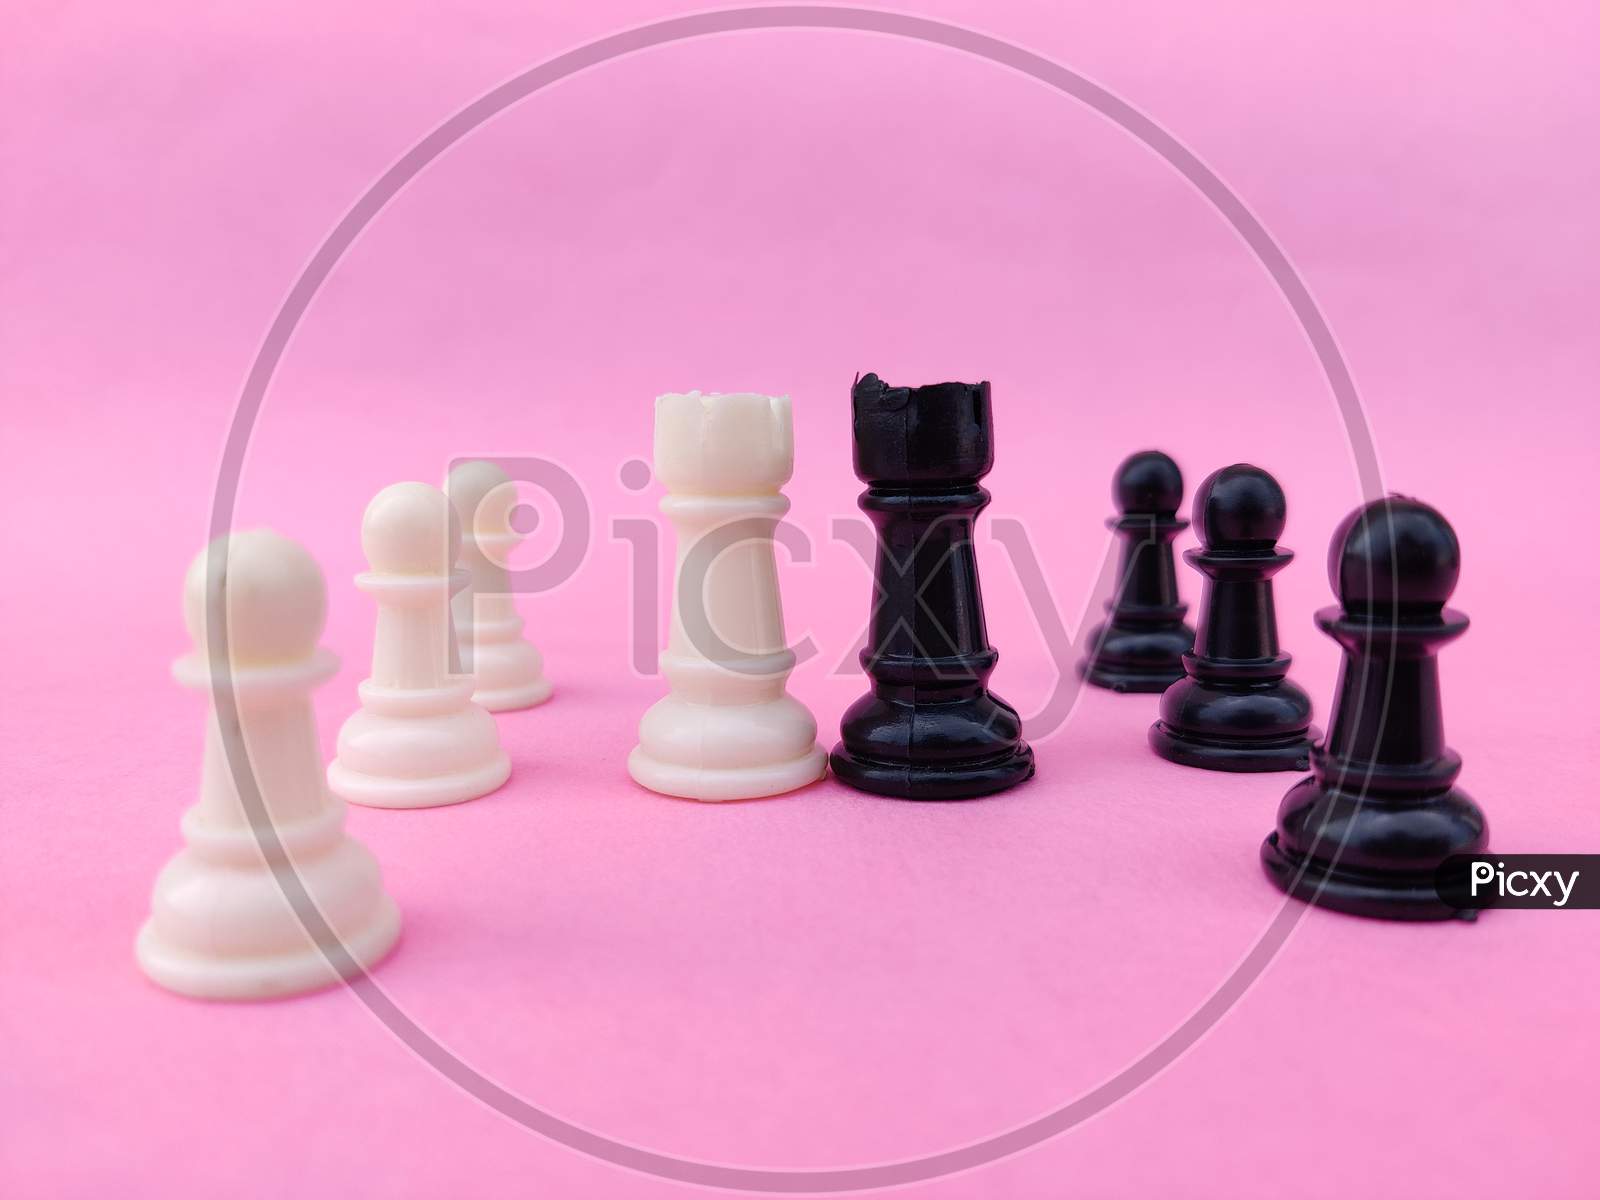 Black And White Rook/Elephant Chess Pieces Facing Each Other. Business Concept. Pink Background